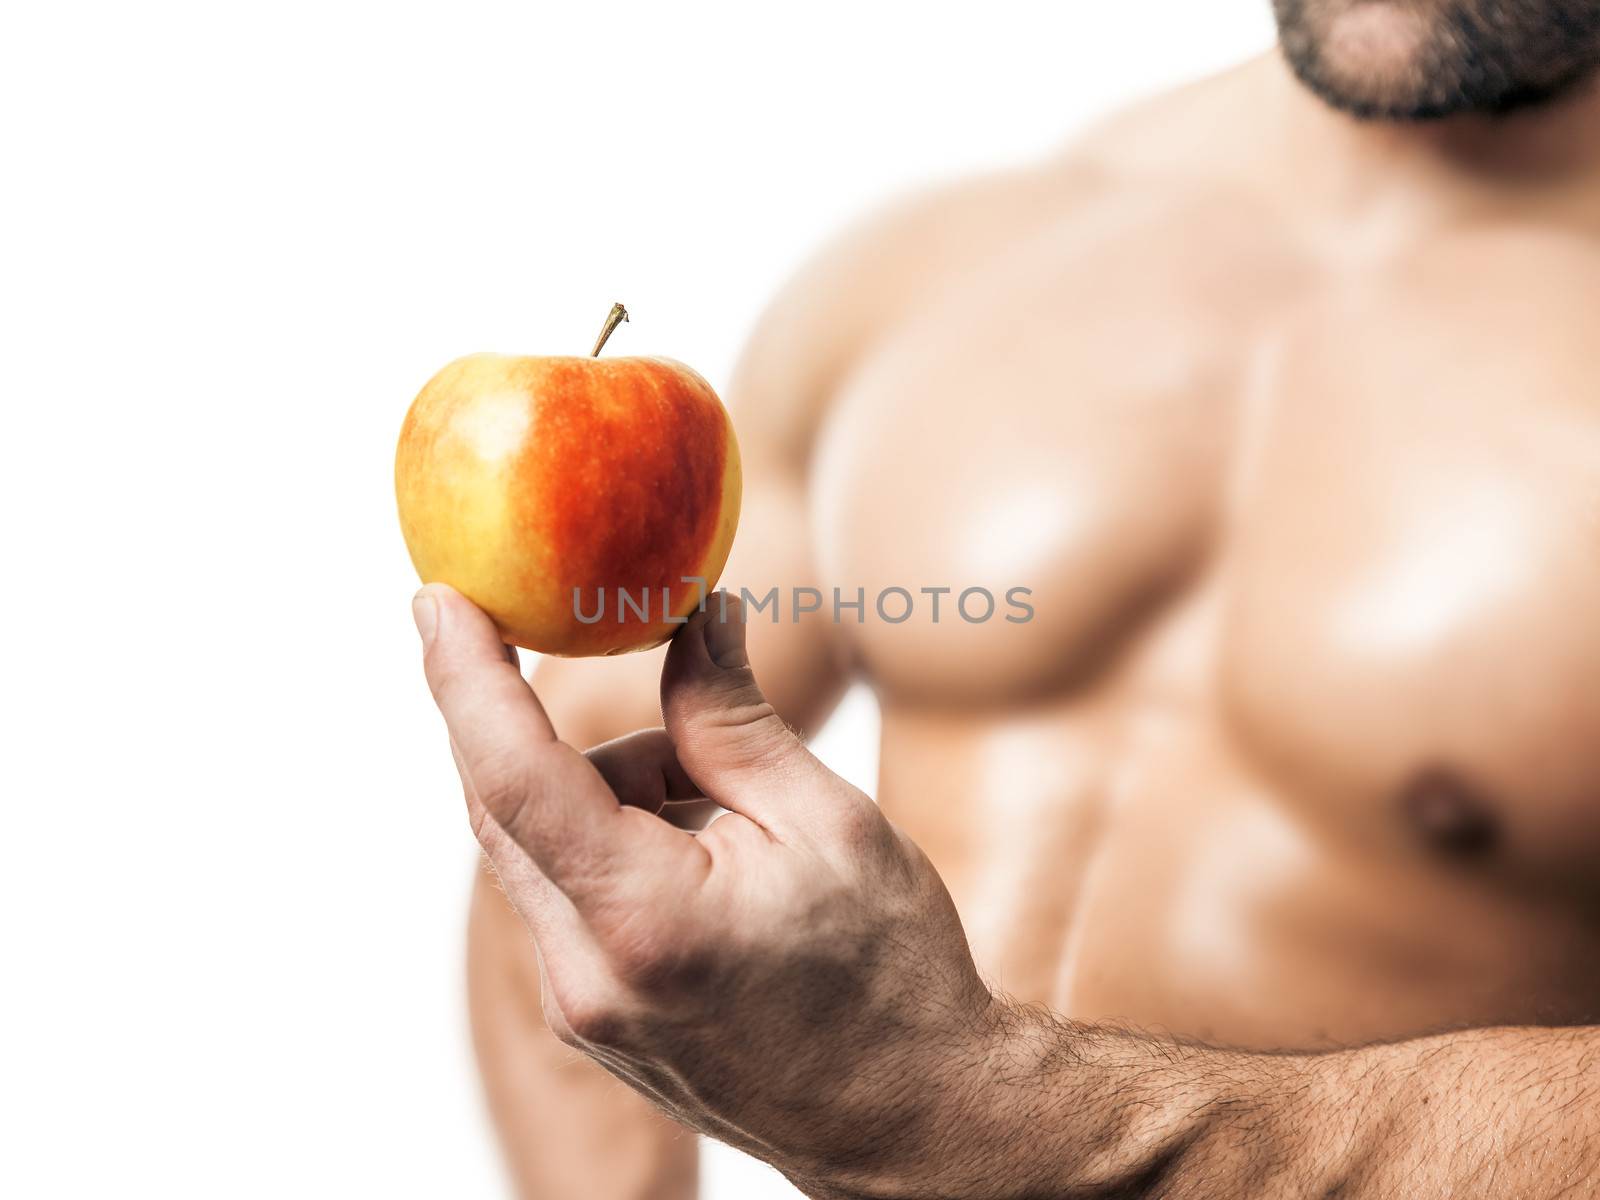 An image of a handsome young muscular sports man and a apple